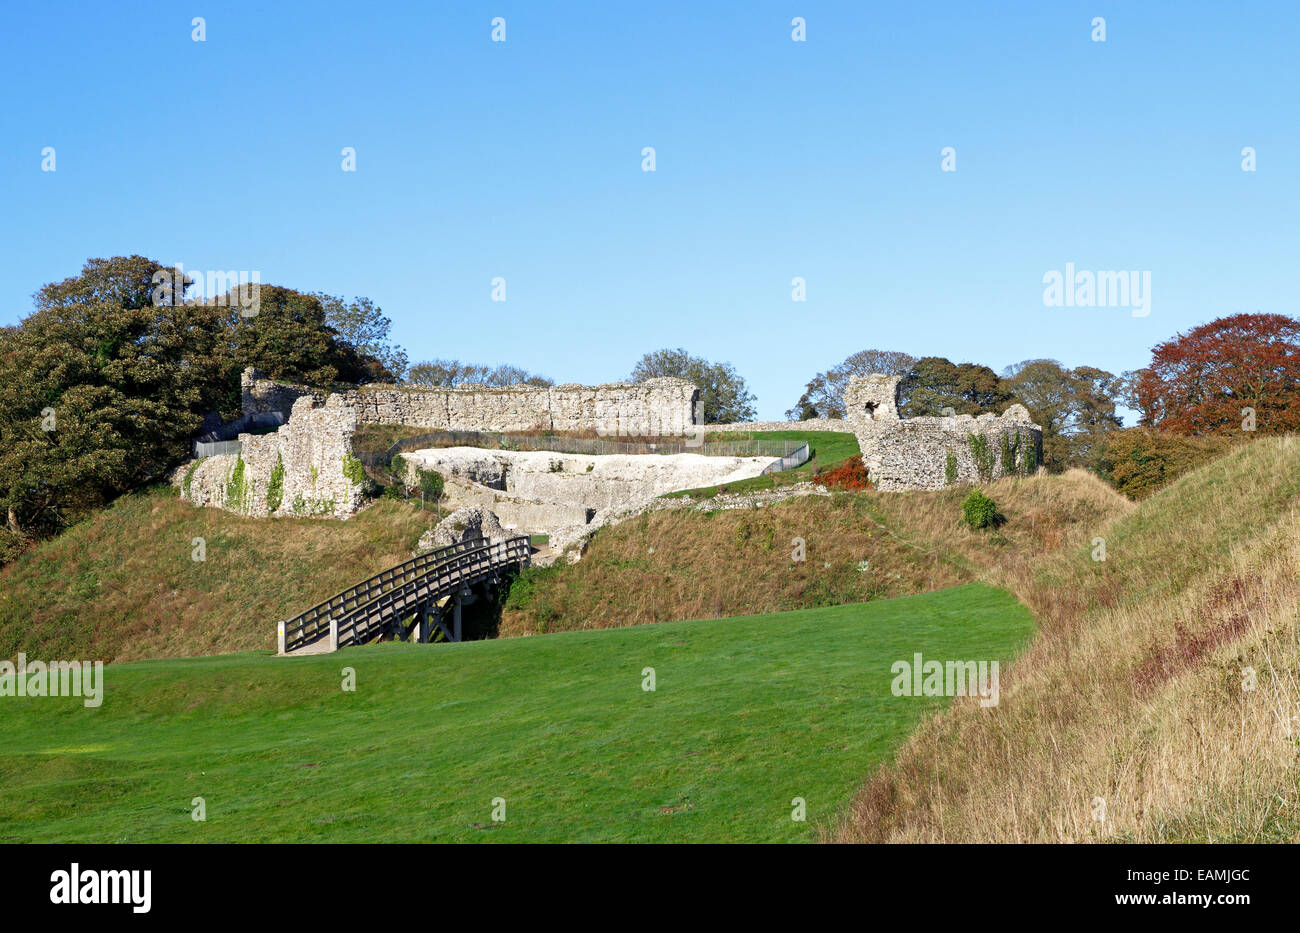 A view of the remains of the Norman motte and bailey castle at Castle Acre, Norfolk, England, United Kingdom. Stock Photo